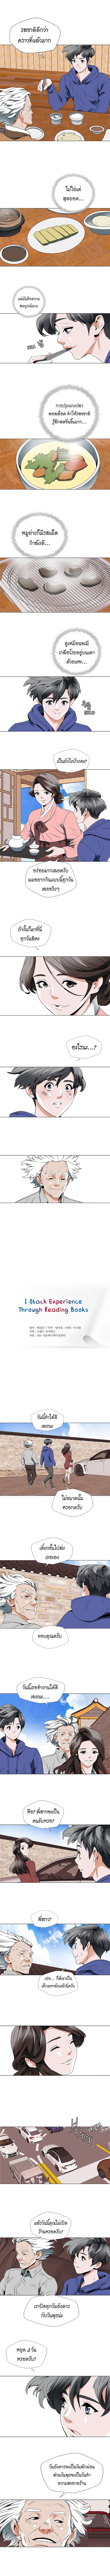 I-Stack-Experience-Through-Reading-Books-24-2.jpg